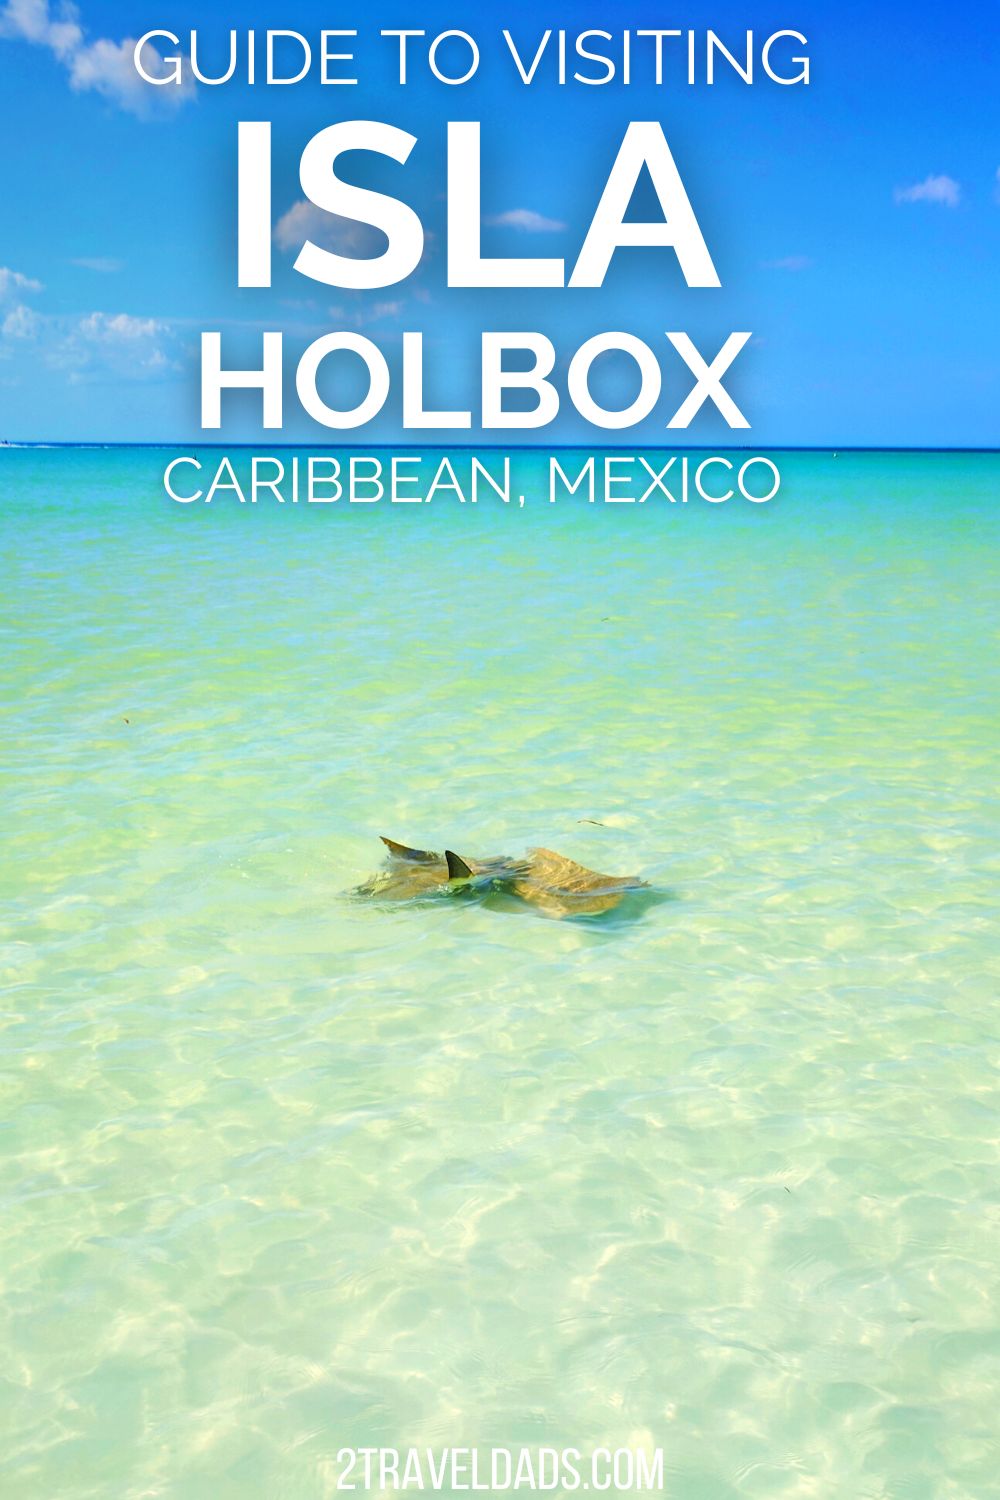 Isla Holbox is a gem when it comes to Caribbean destinations. This small Mexican island has no cars, beautiful street art and amazing food. From flamingos to sea stars, see what you'll find on Isla Holbox.